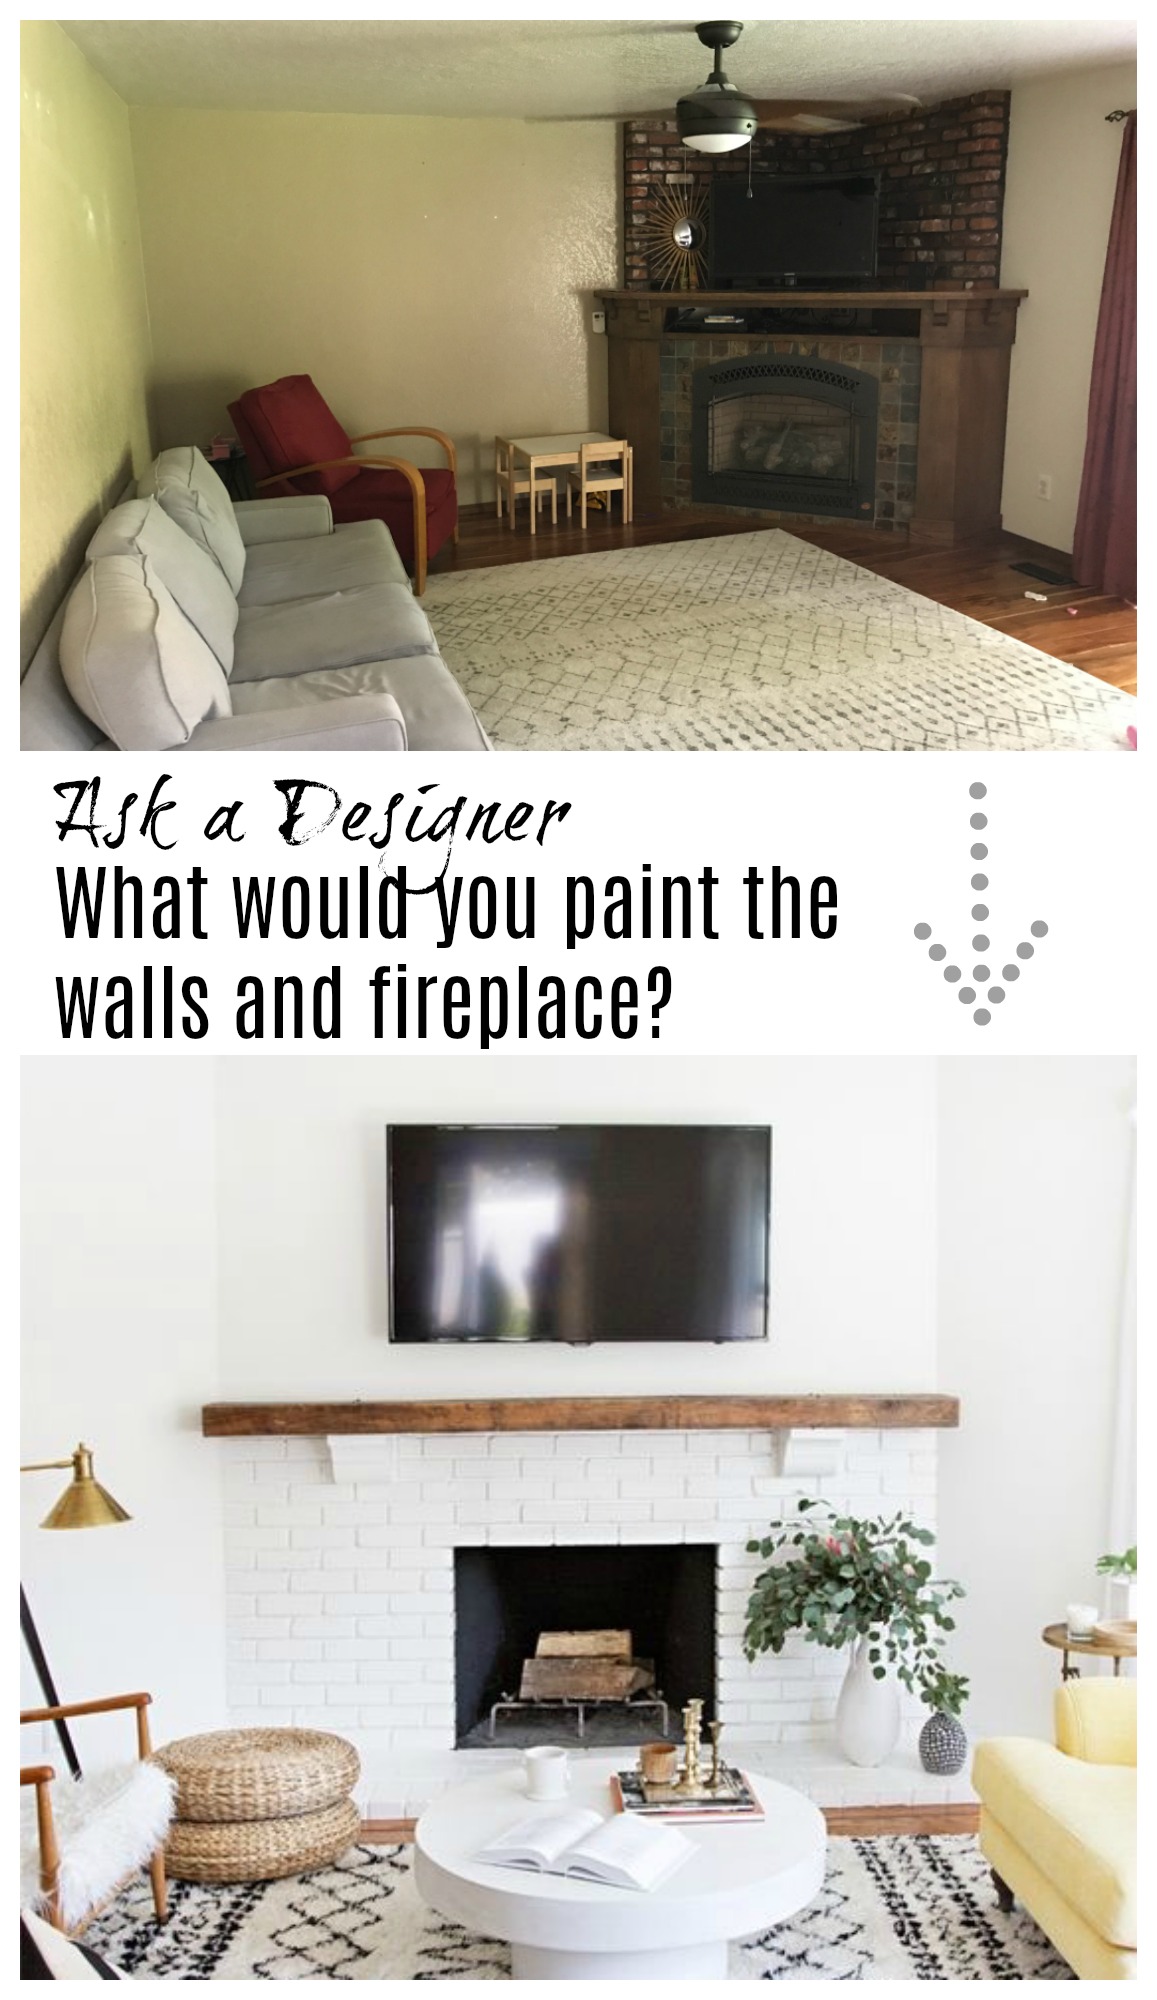 Ask a Designer- Help! What would you paint the walls and fireplace?